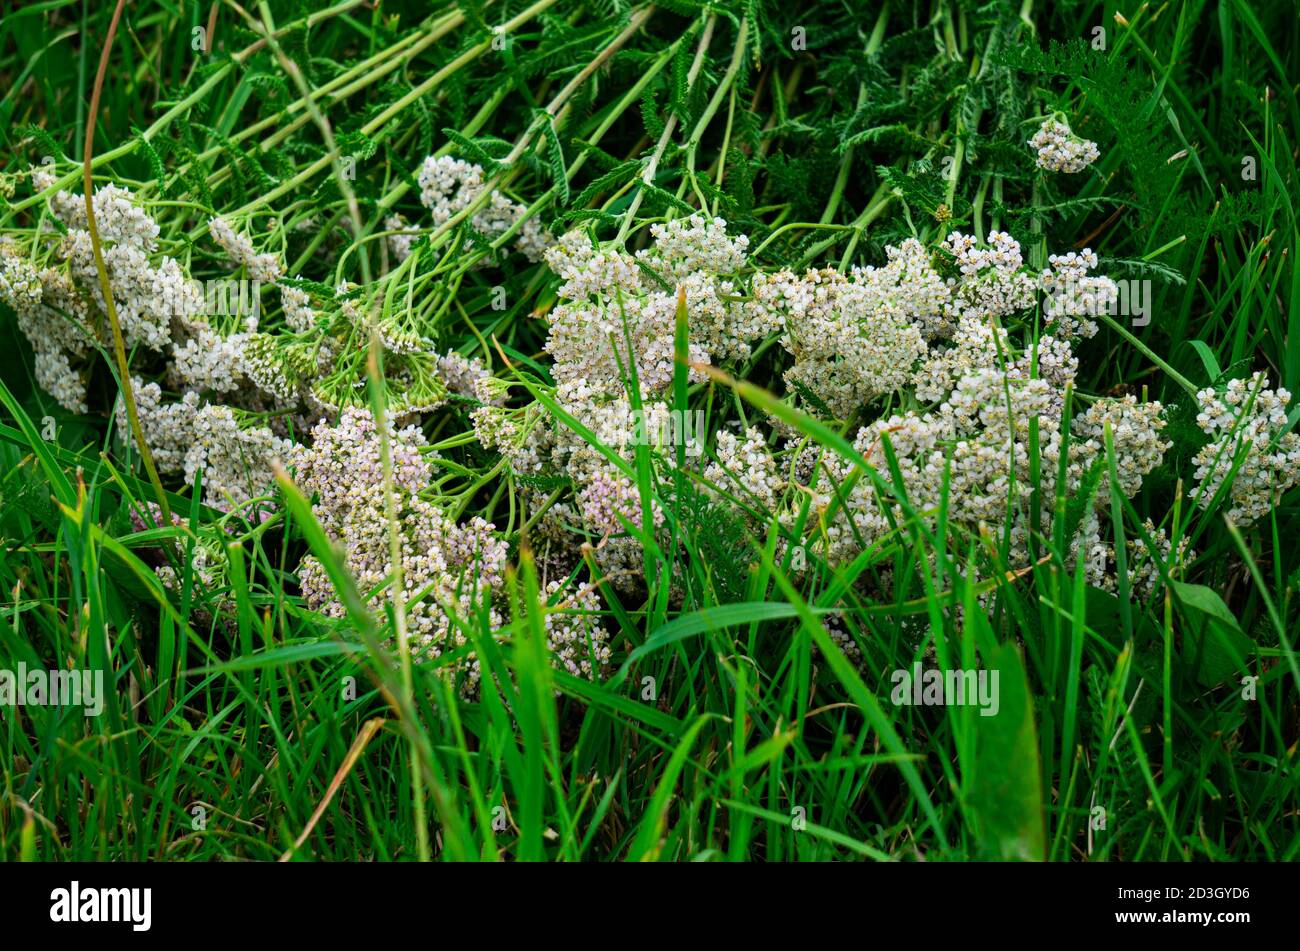 A bouquet of yarrow flowers lies on the grass. Stock Photo